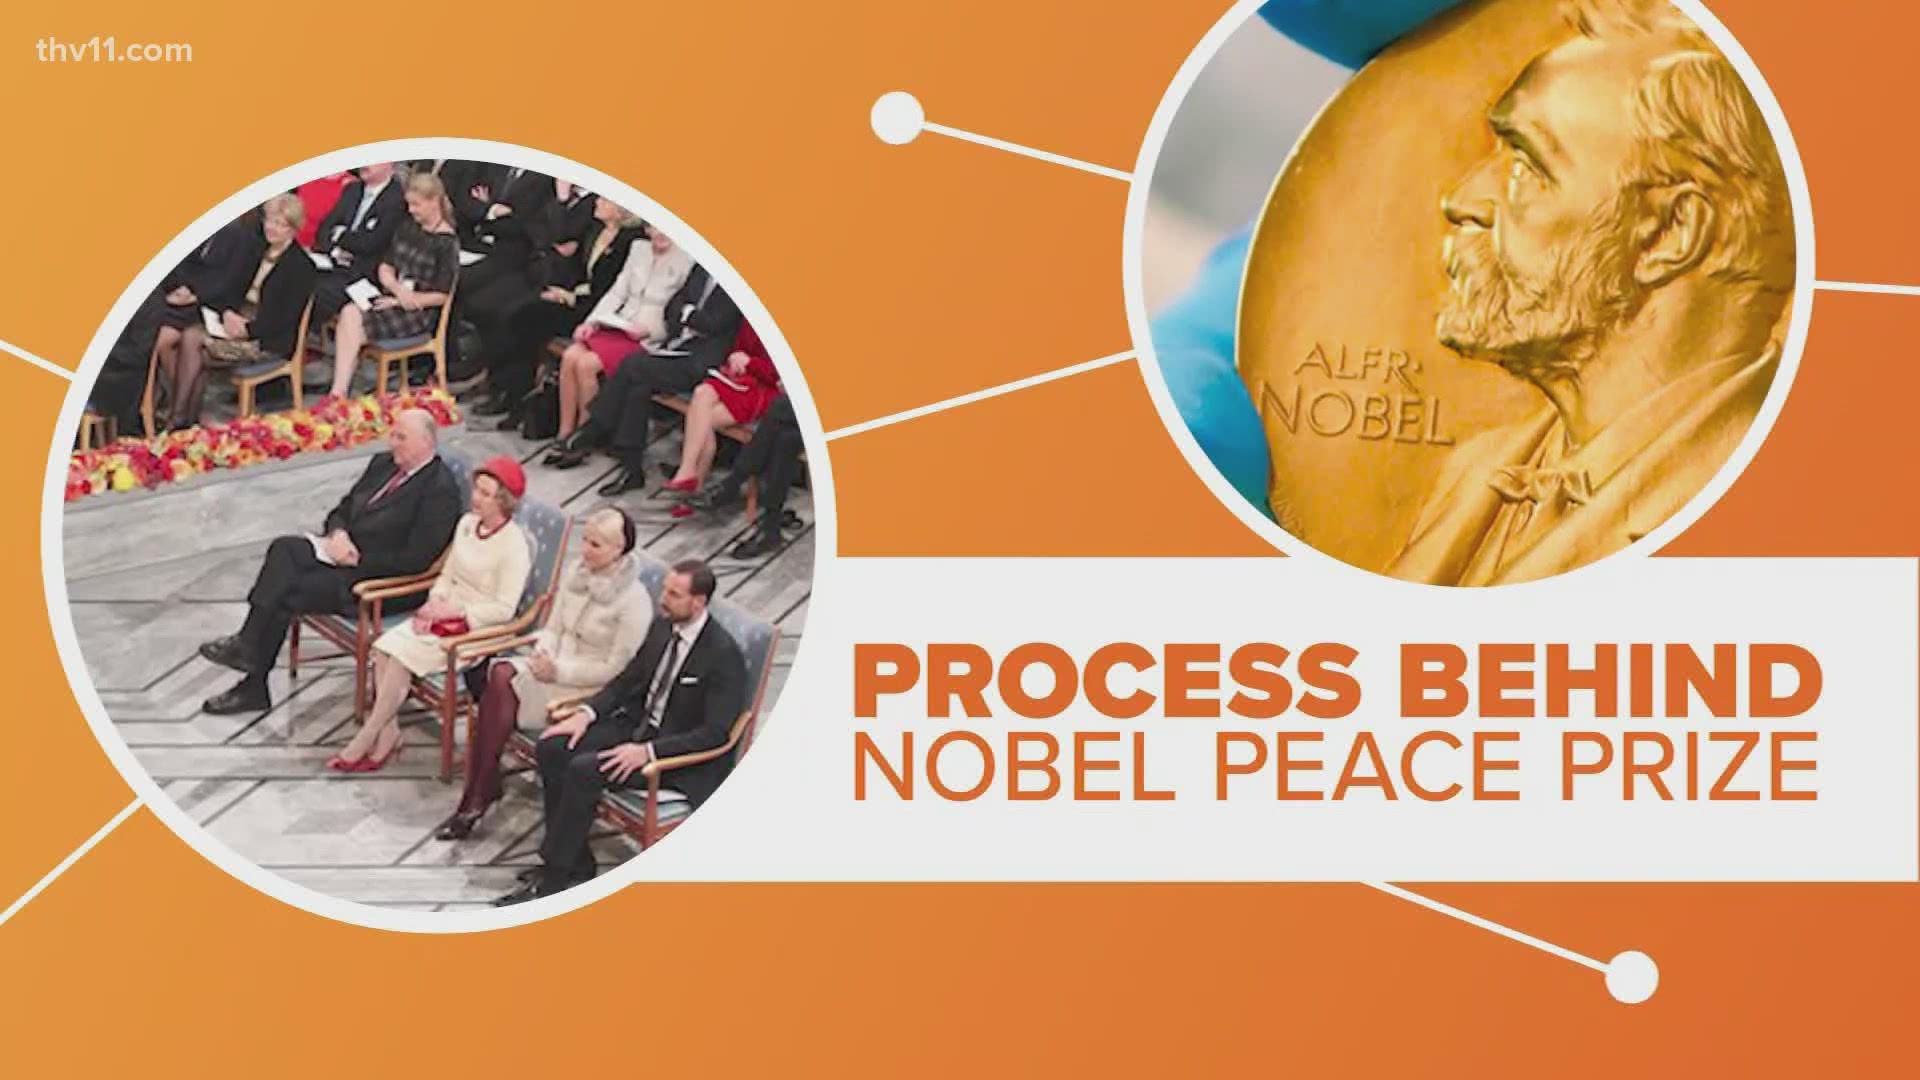 We're connecting the dots on one of the most prestigious awards in the world -- the Nobel Peace Prize.